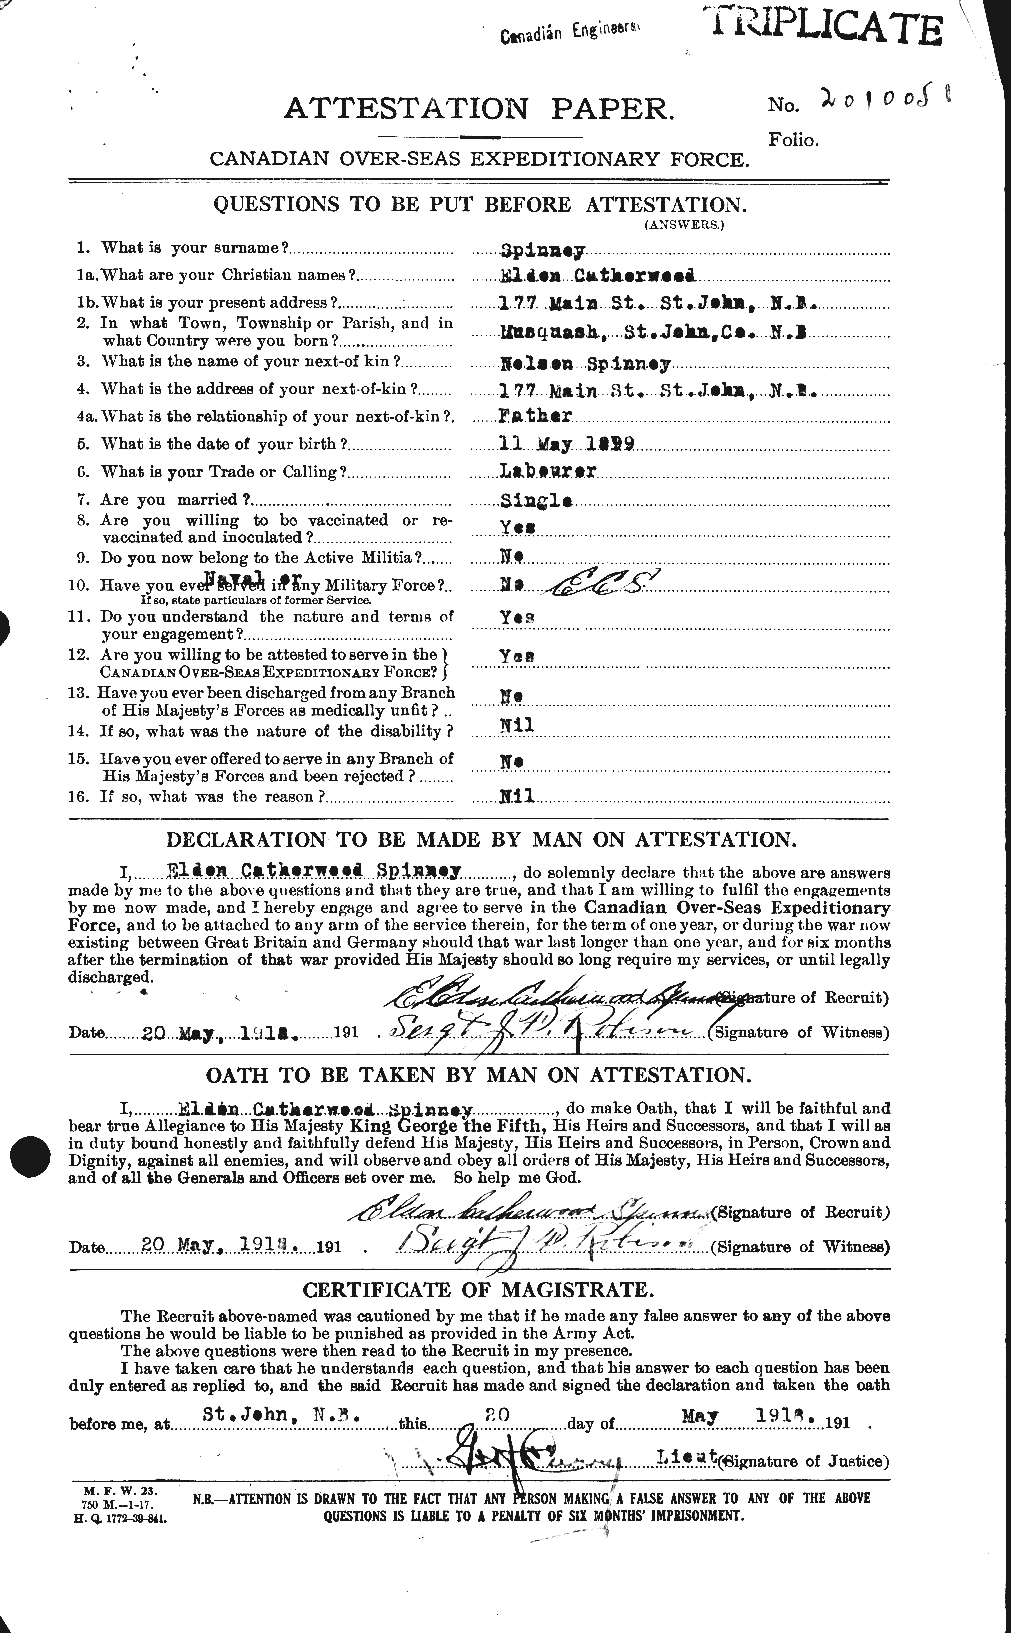 Personnel Records of the First World War - CEF 114423a